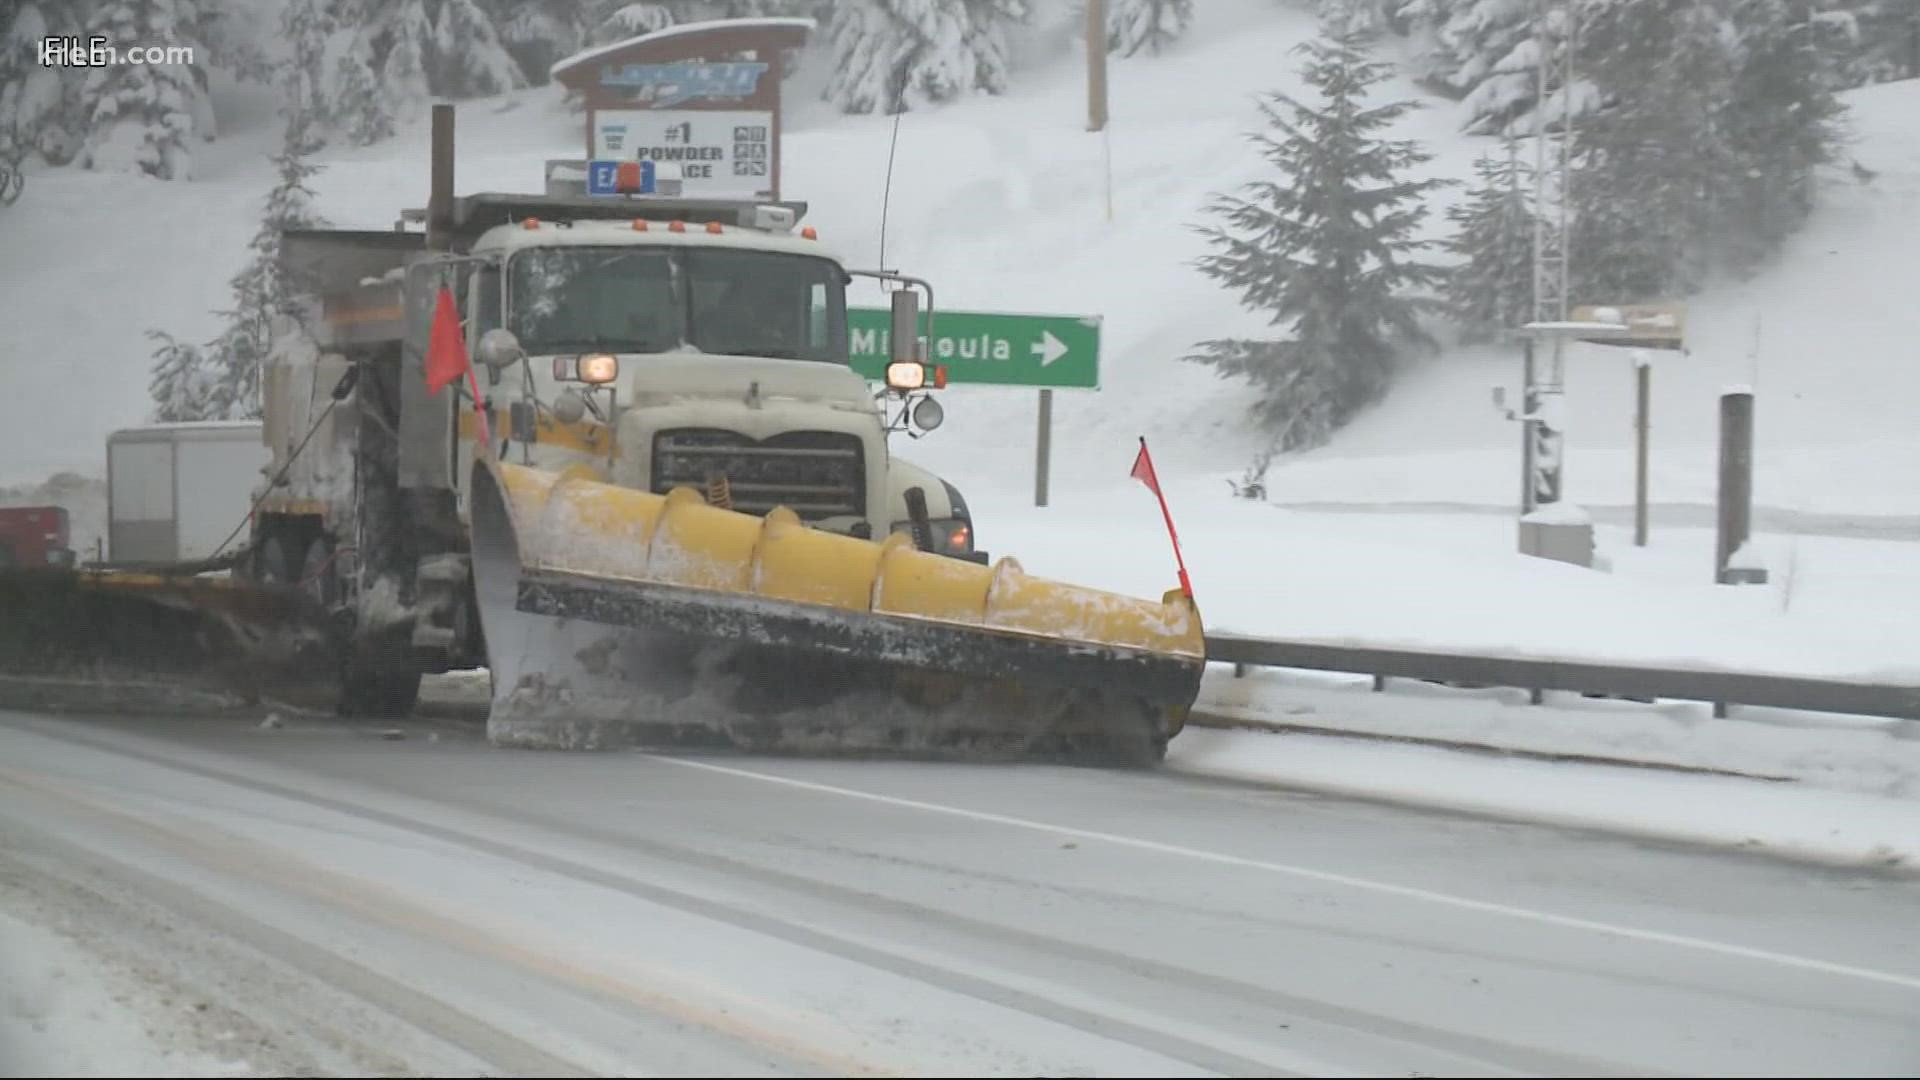 The Washington State Department of Transportation also reported that its crews had several close calls overnight between its plow trucks and other vehicles.